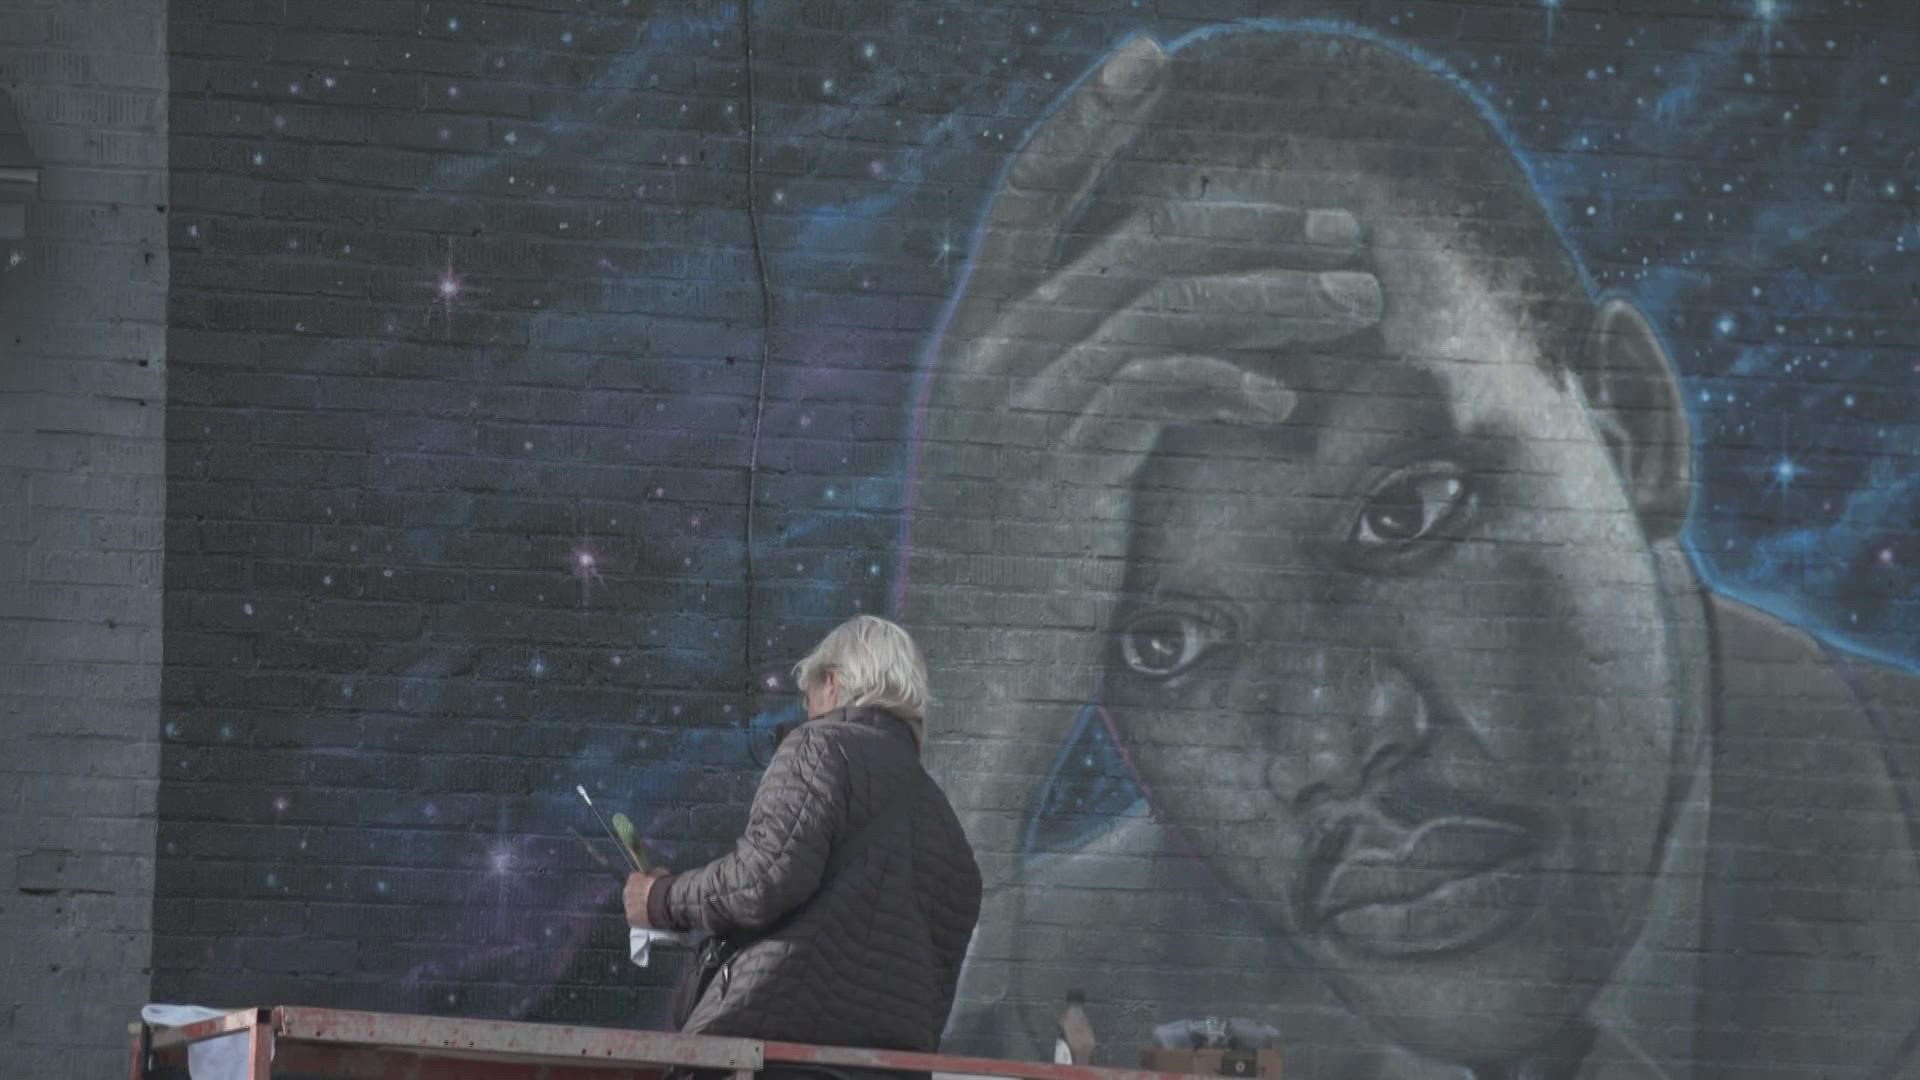 The mural was vandalized on Martin Luther King Jr. Day. The original artist traveled back to Seattle from Mexico to restore it.